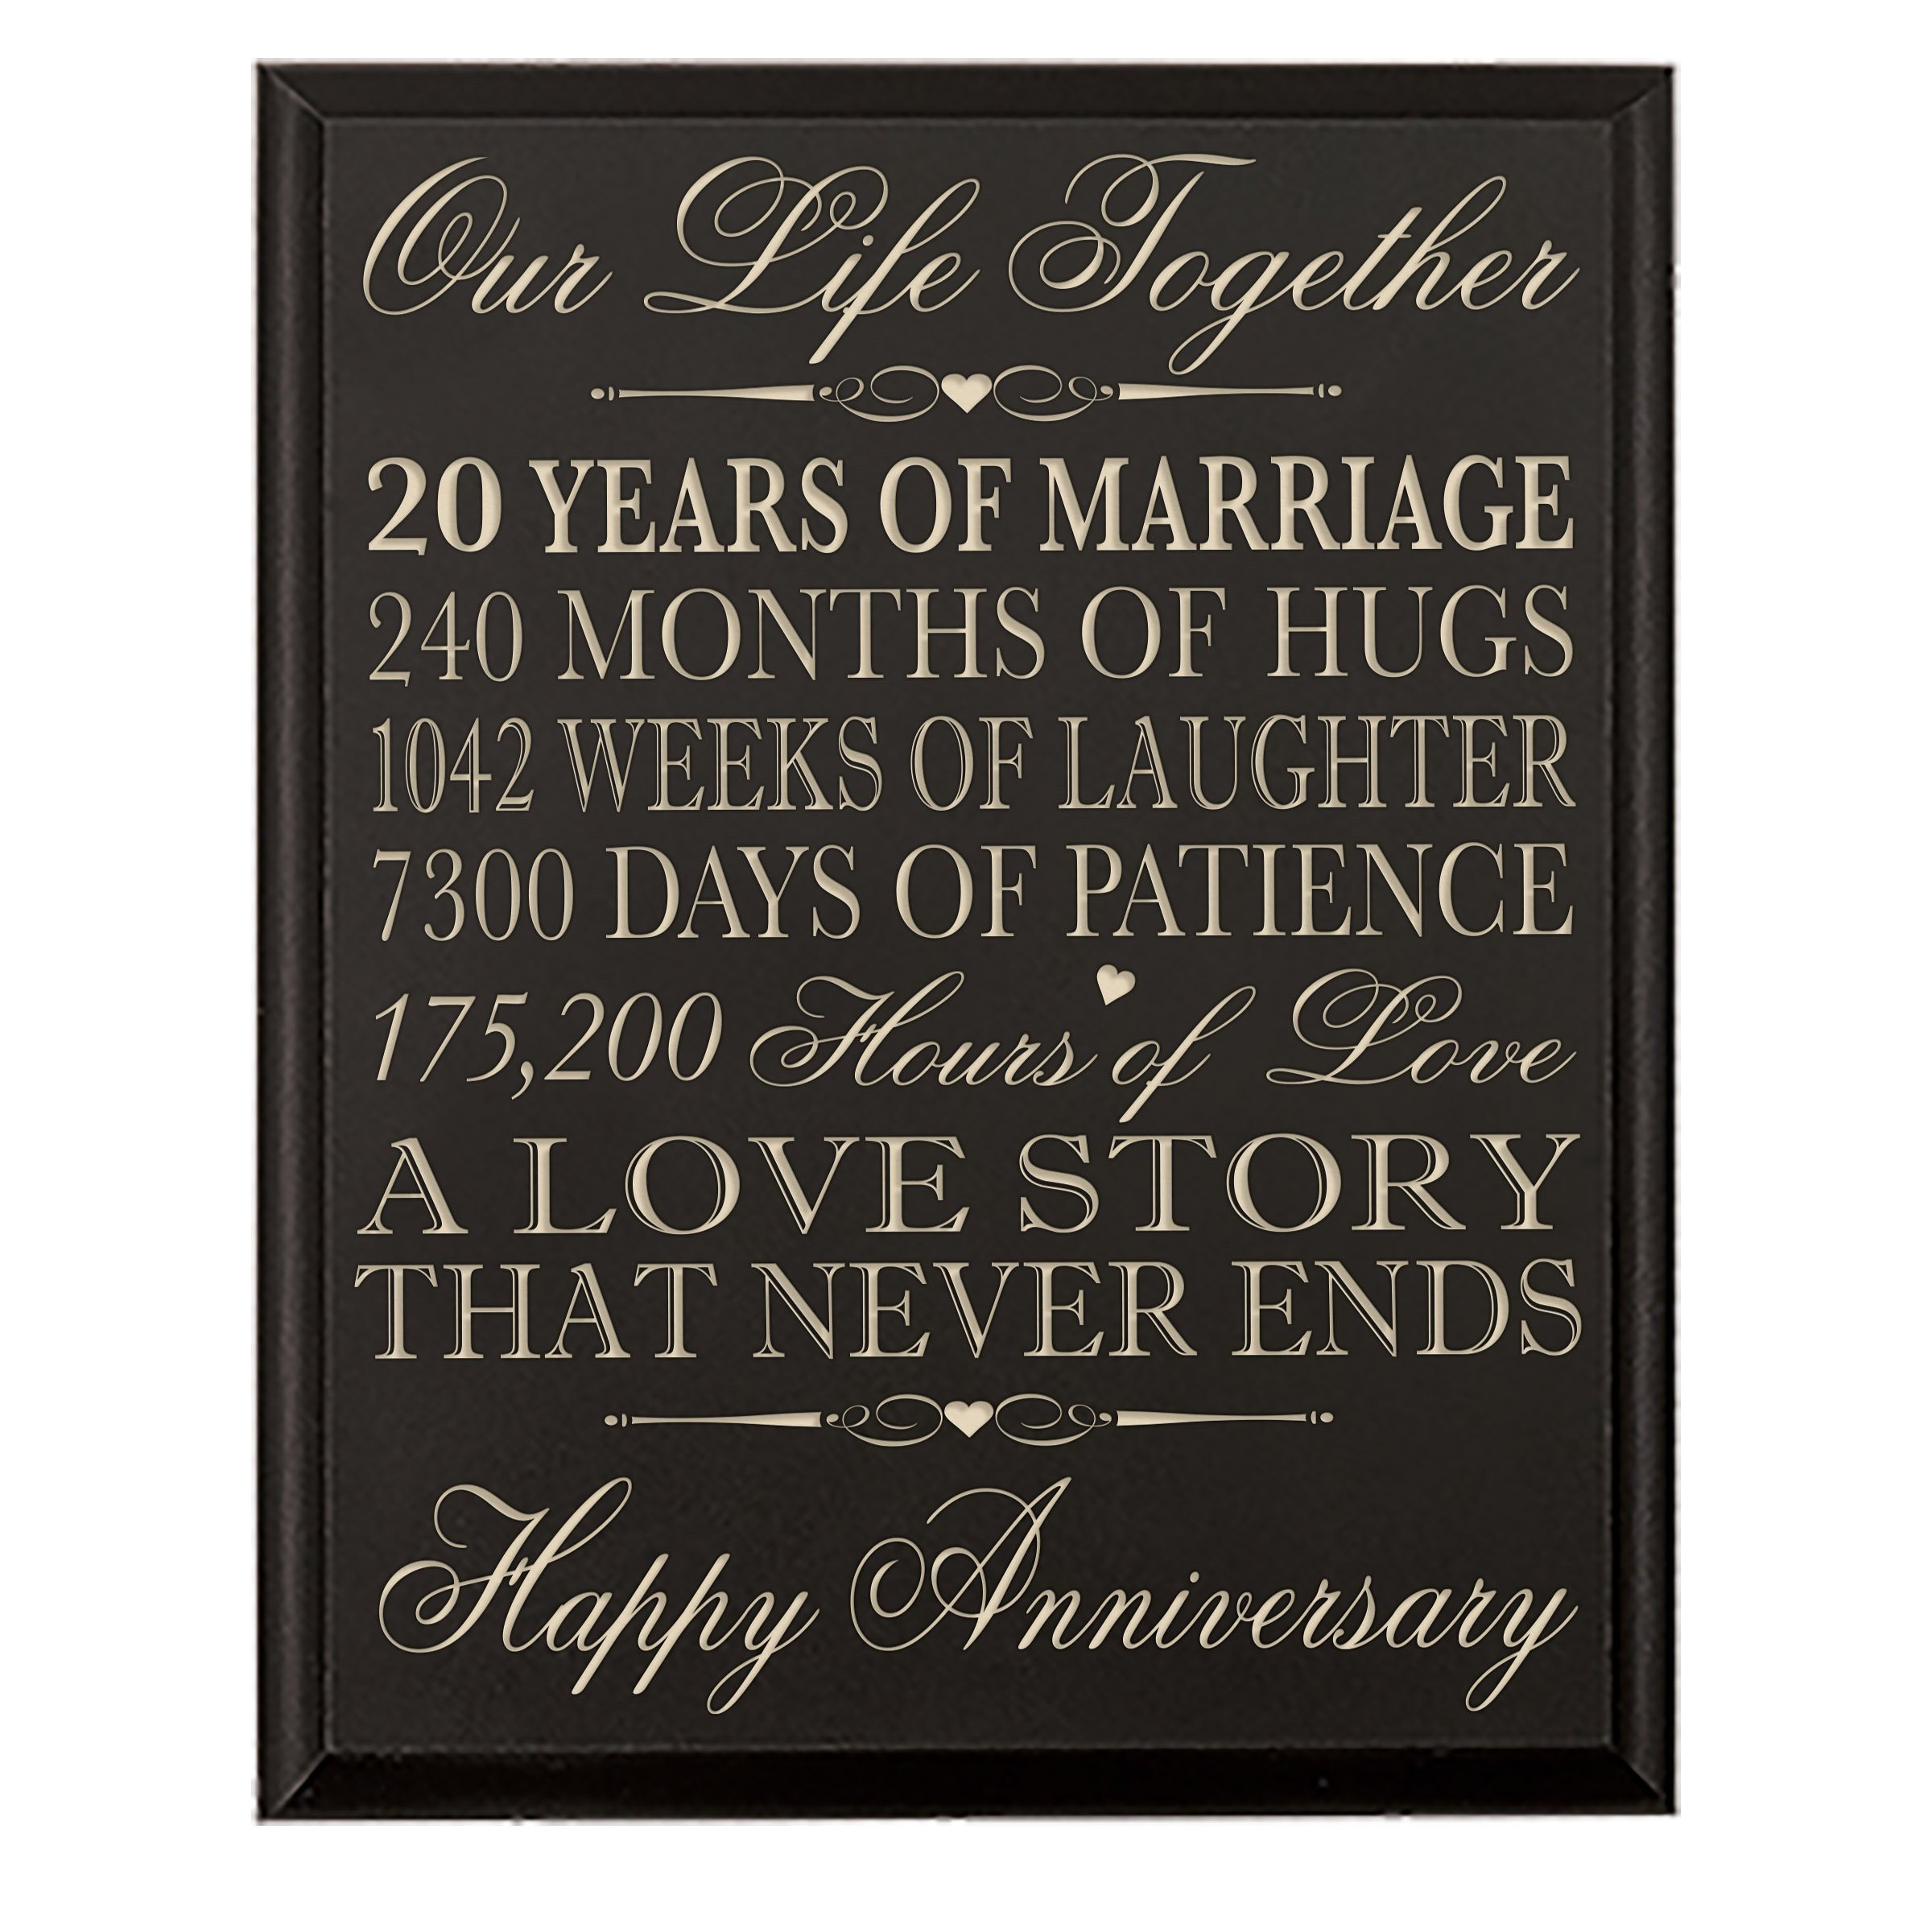 20Th Wedding Anniversary Gift Ideas For Couple
 Buy 20th Wedding Anniversary Wall Plaque Gifts for Couple